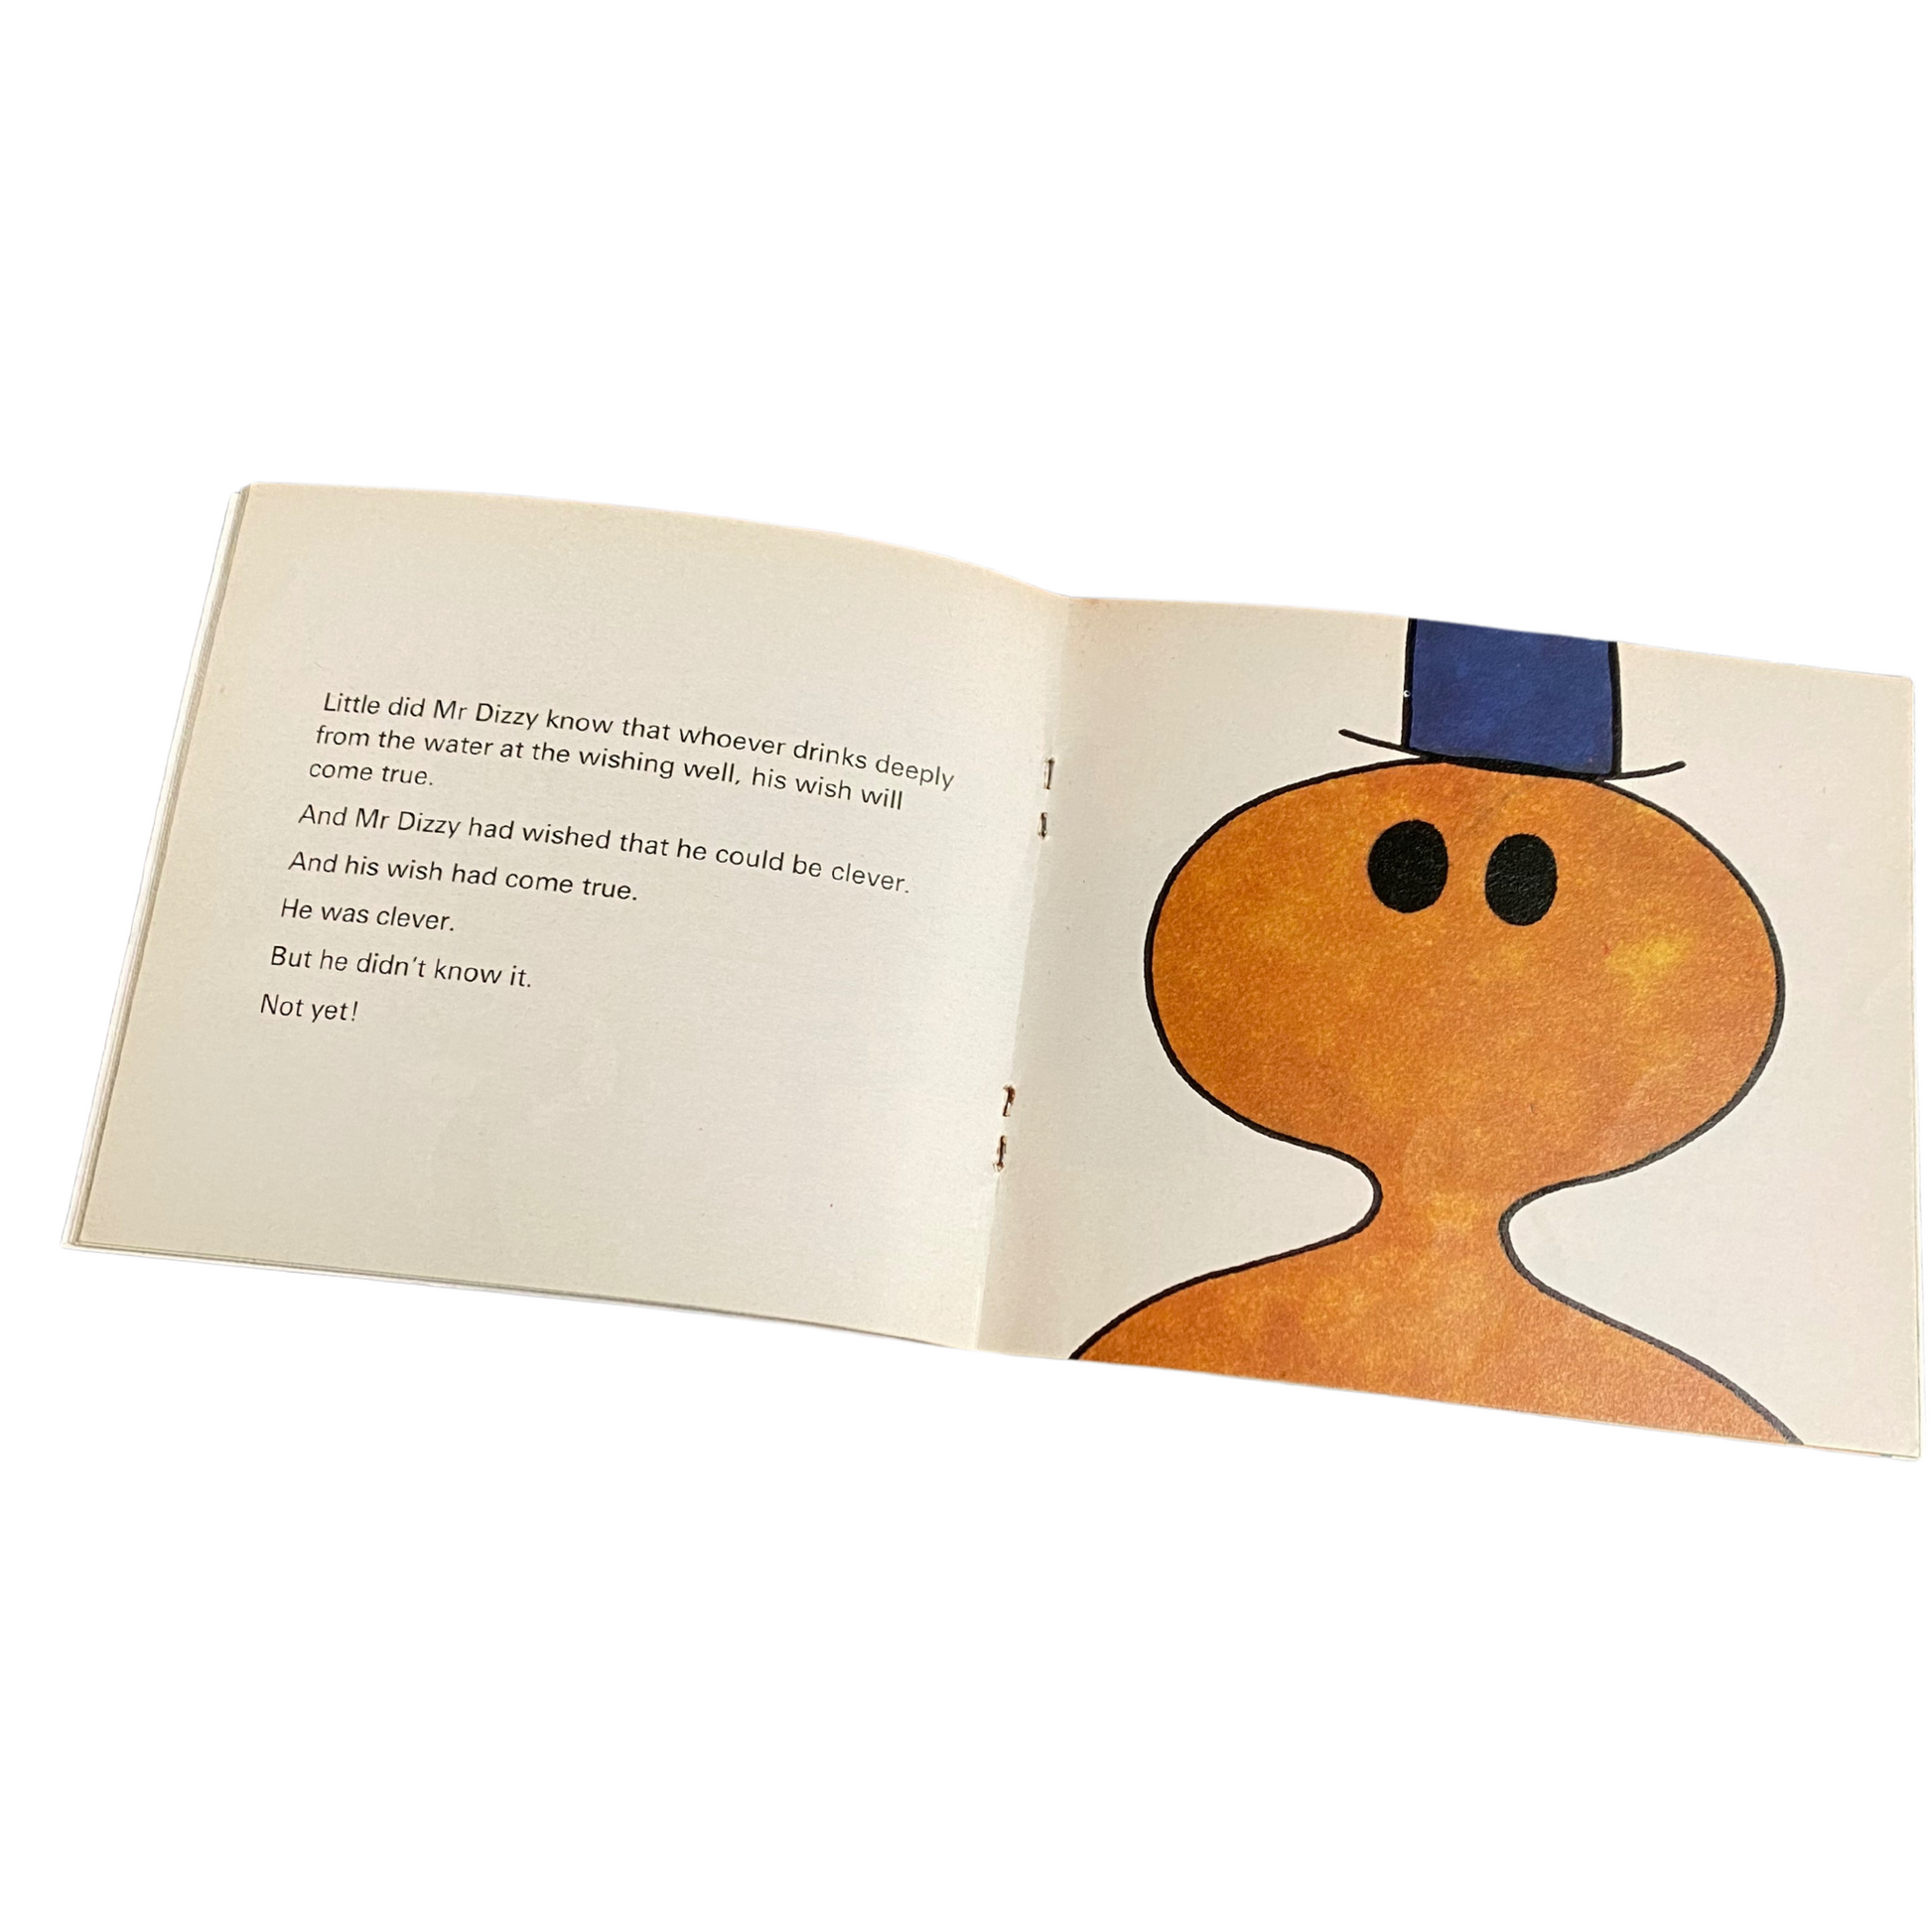 Collectible  Mr Dizzy  book  - Original 1970s Roger Hargreaves Edition